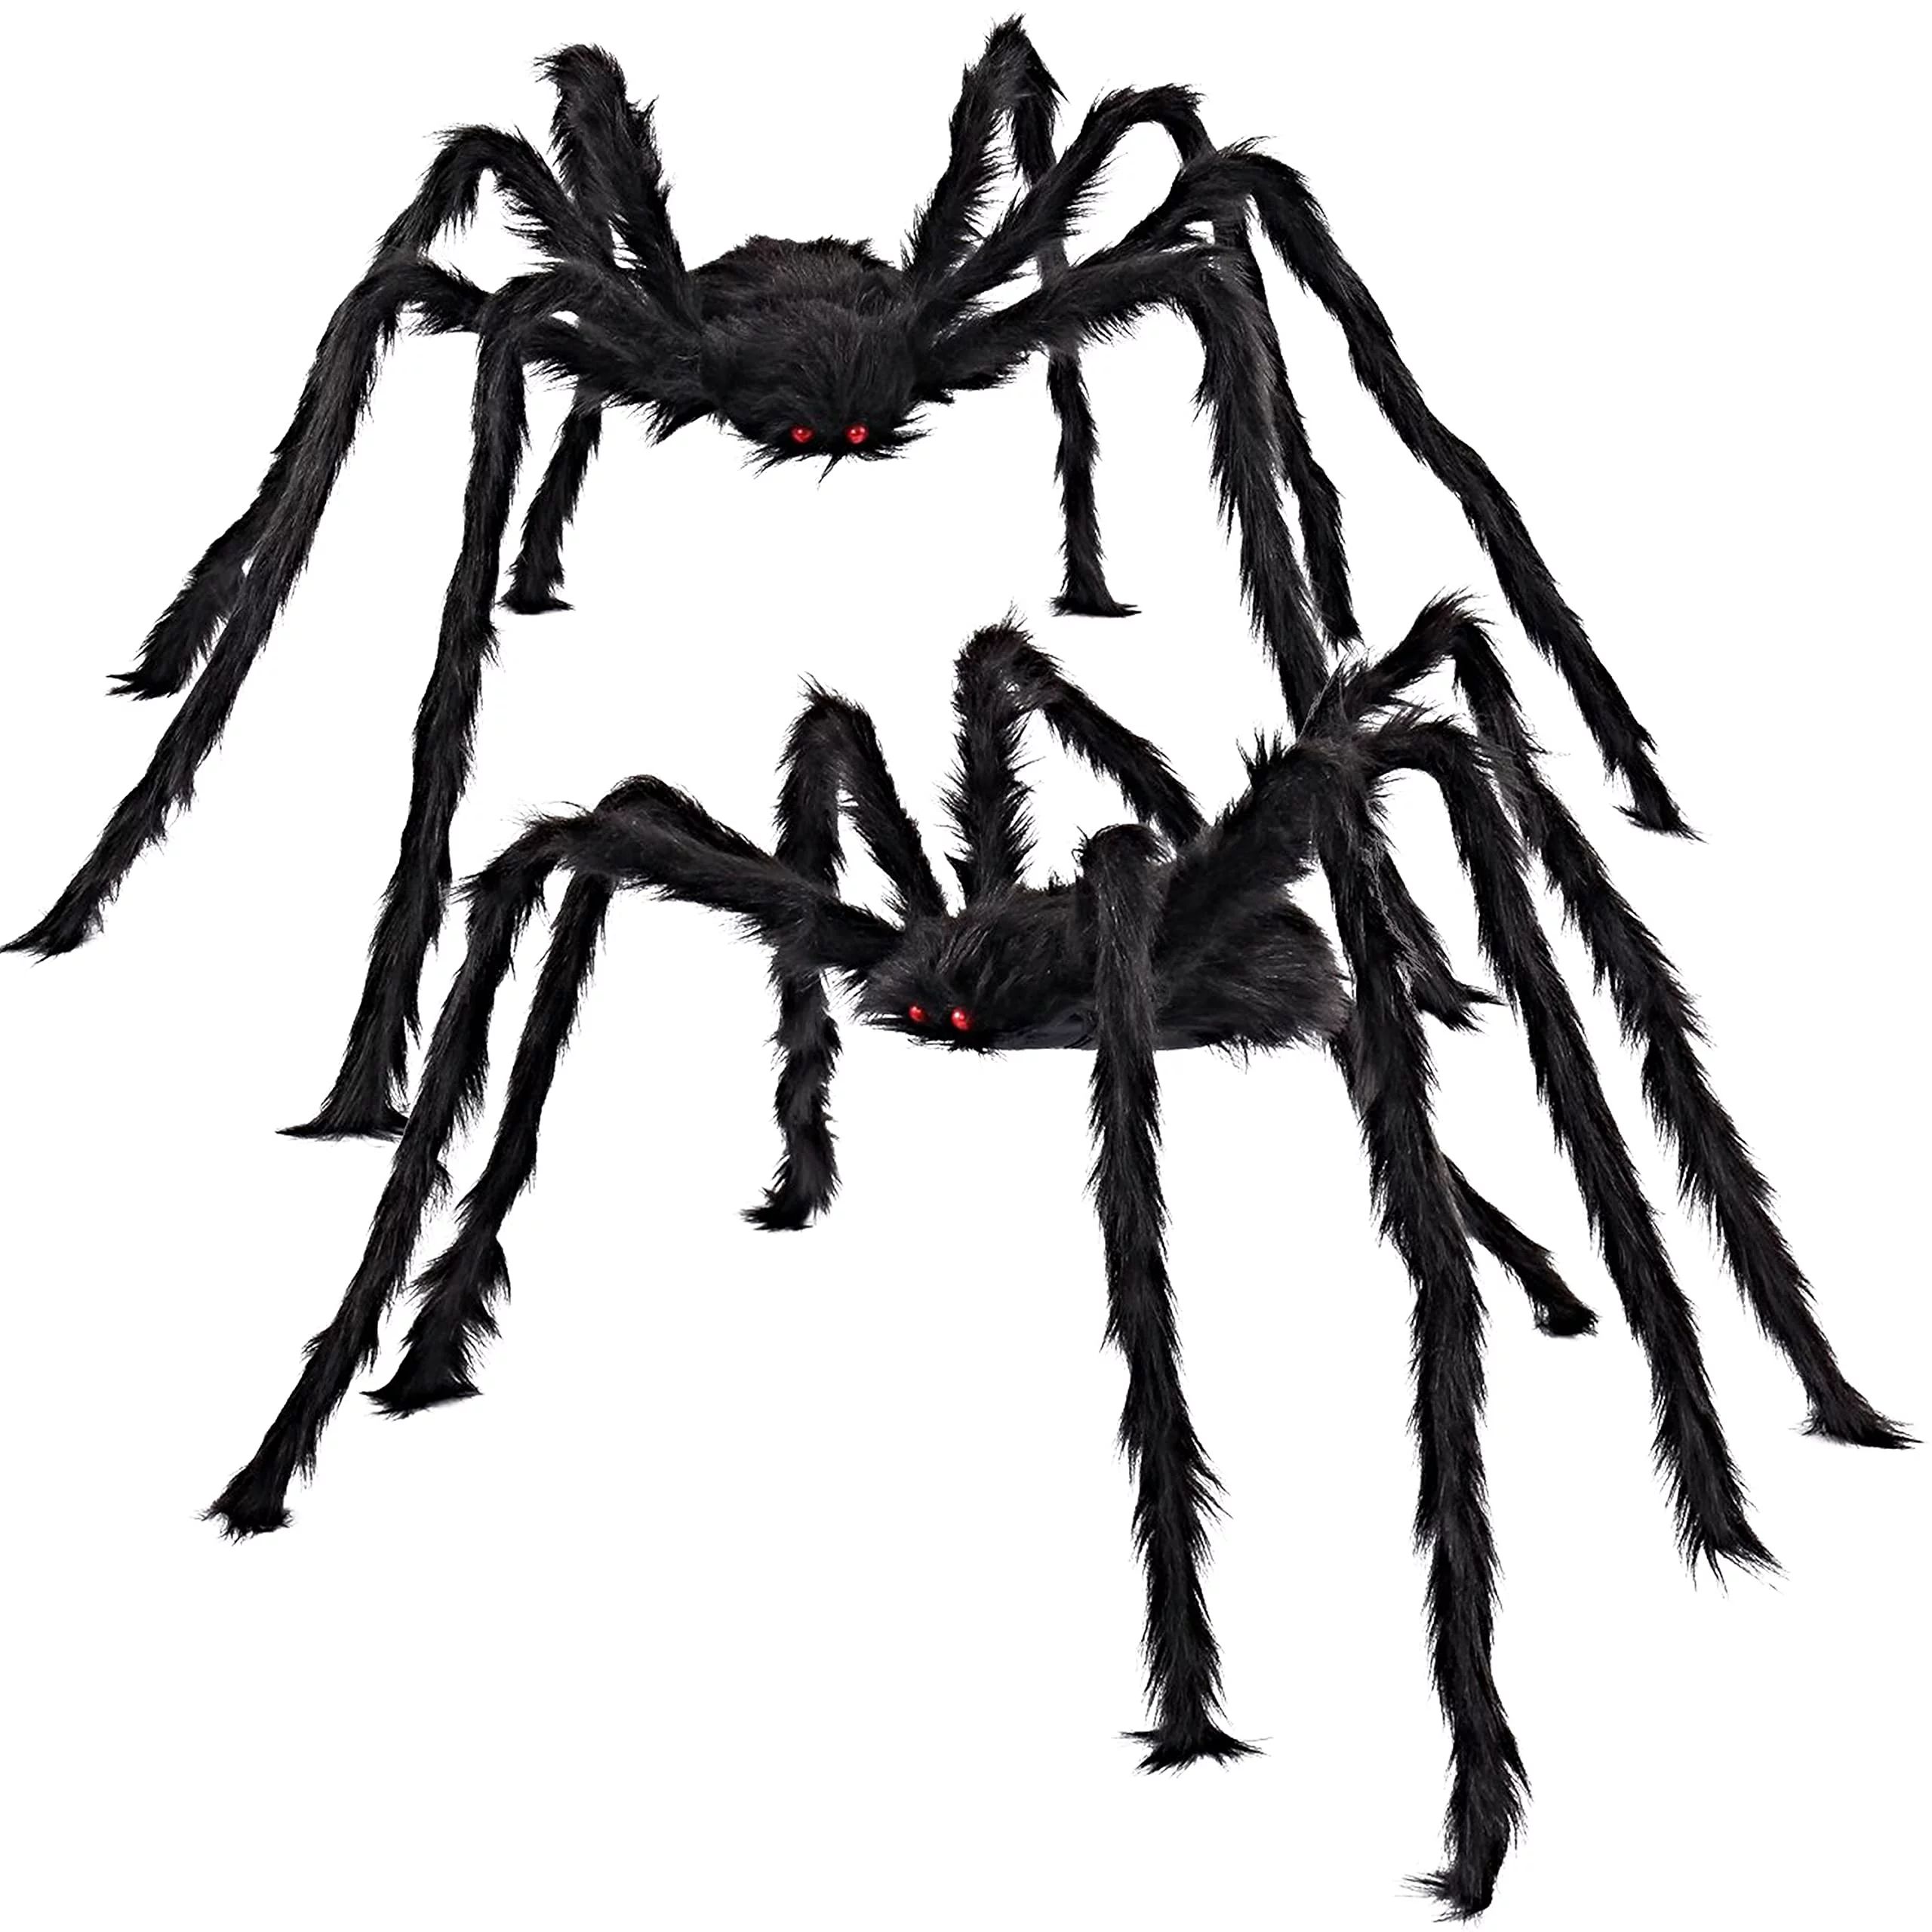 JOYIN 2 Pack 5Ft 63inches Halloween Outdoor Decorations Hairy Black Spider, Scary Giant Spider Fa... | Walmart (US)